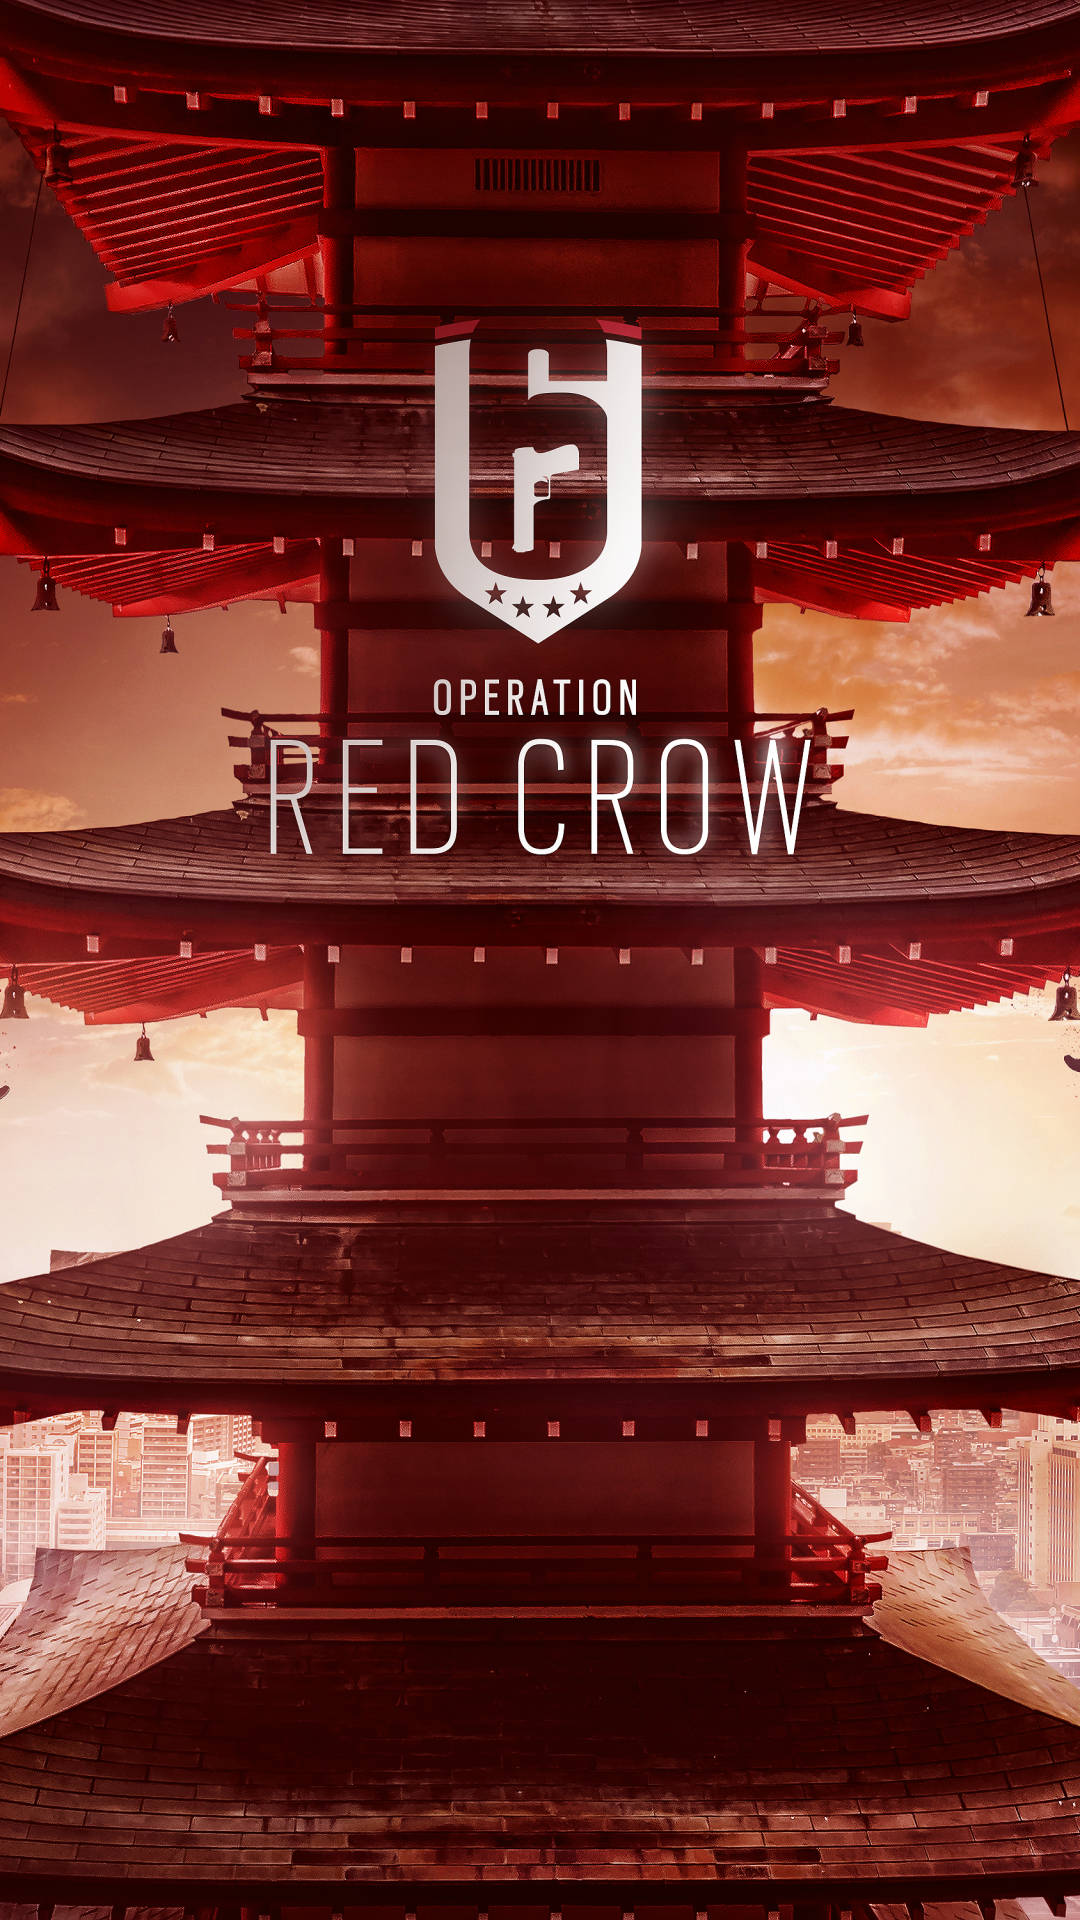 Tapetrainbow Six Siege Operation Red Crown Iphone-tapet. (note: This Is Already In Swedish And Means 